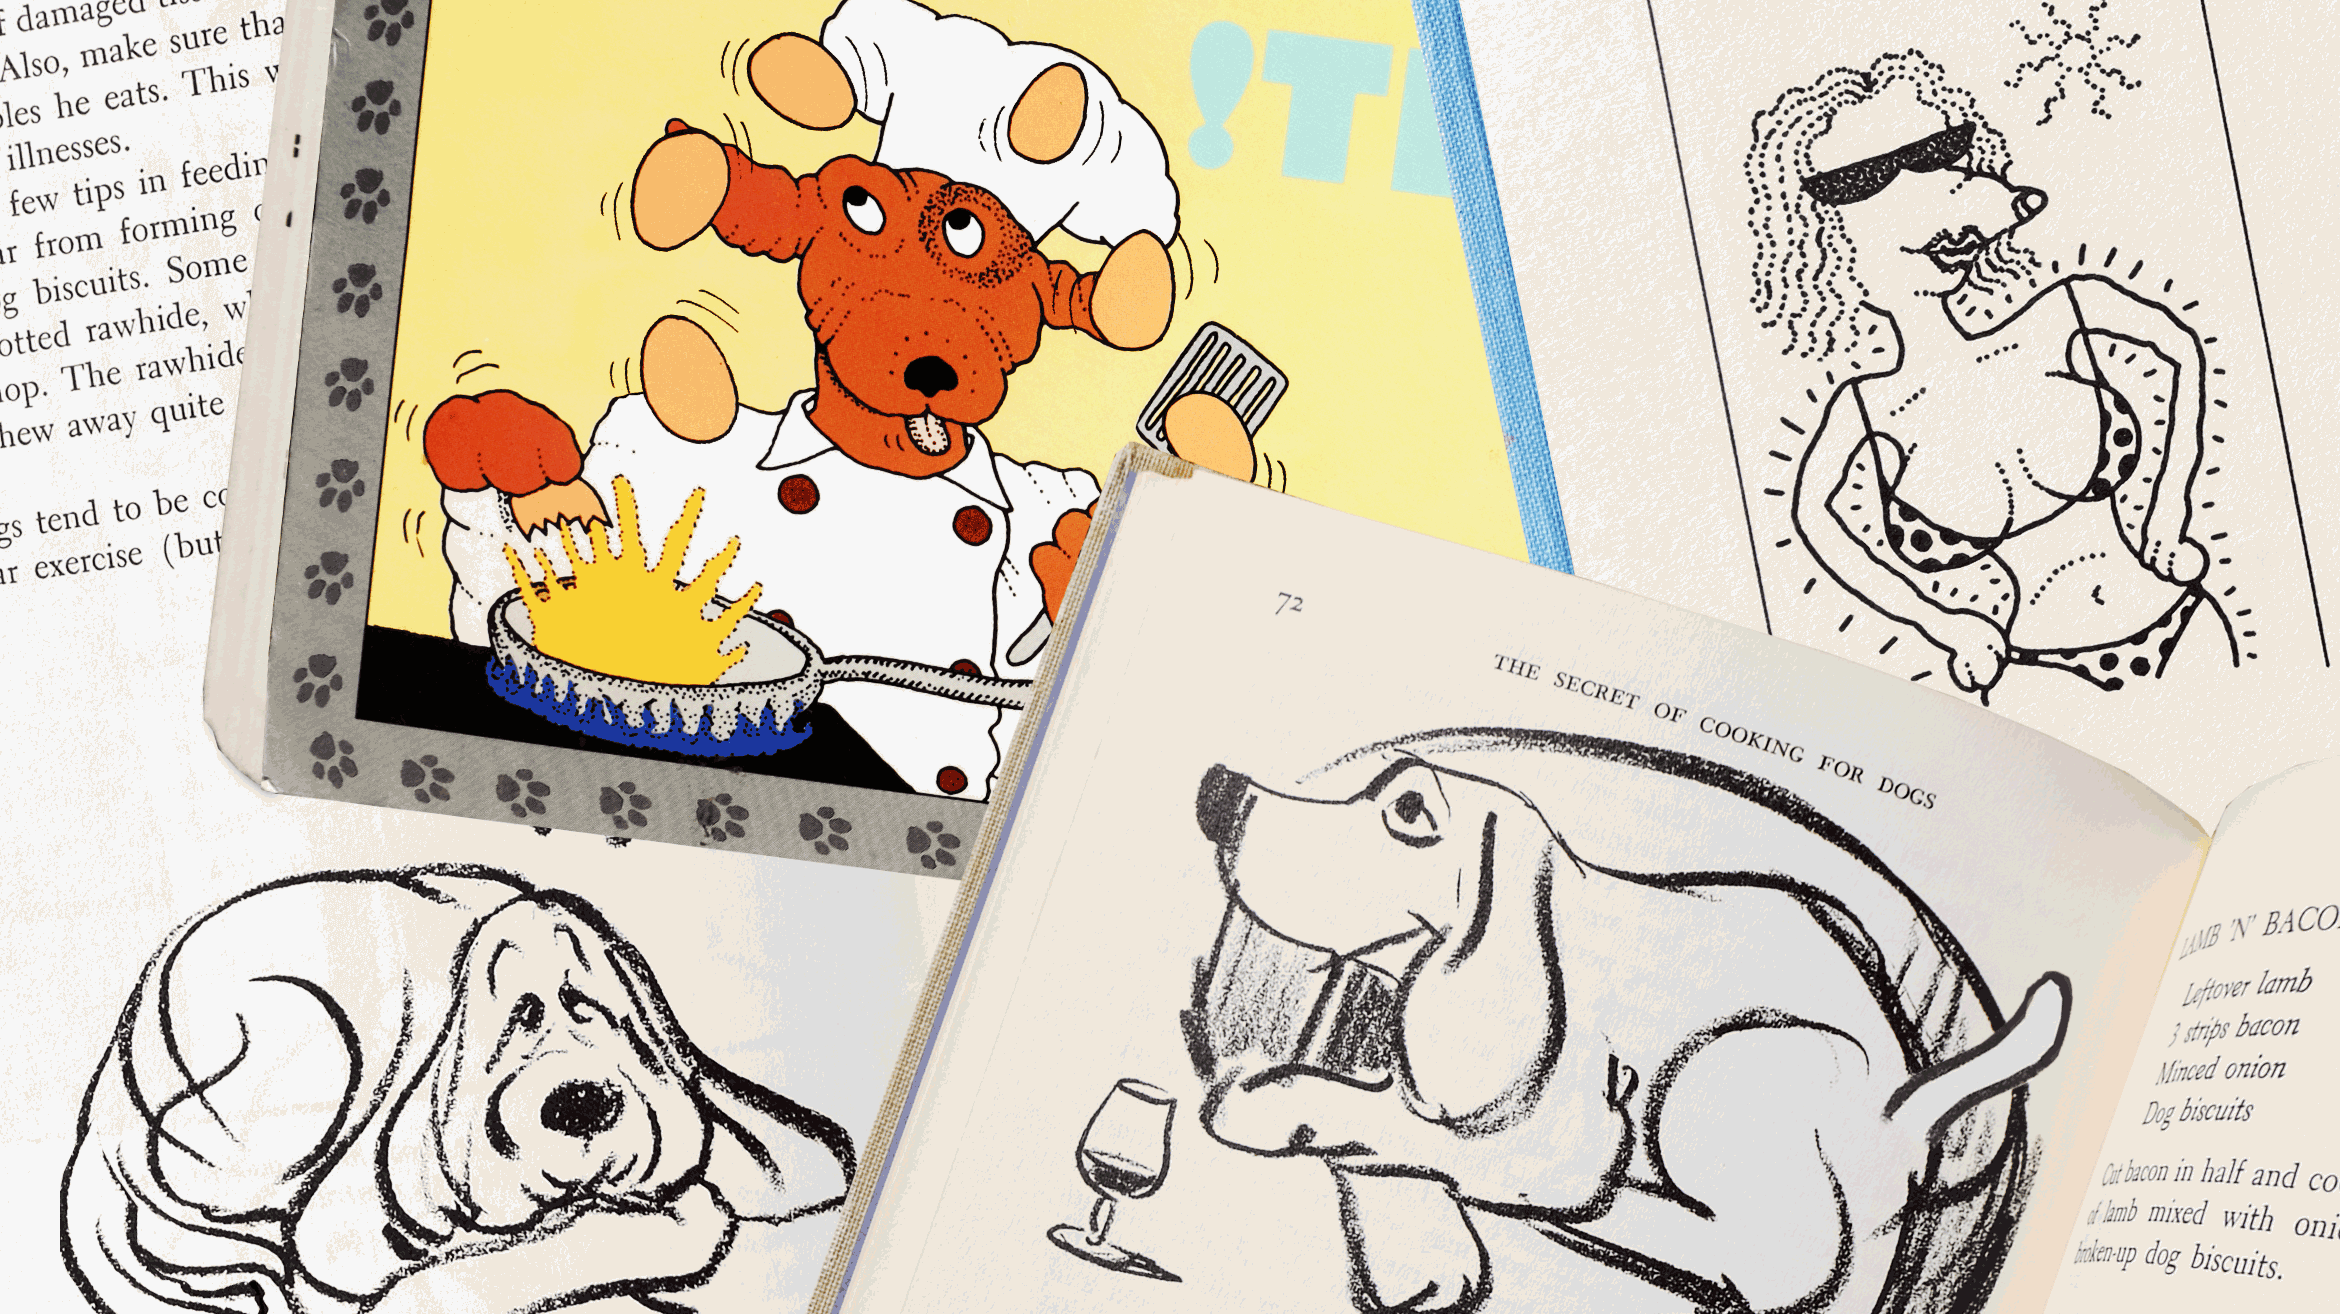 Bone Appétit: The Short and Happy History of Cookbooks for Dogs | TASTE